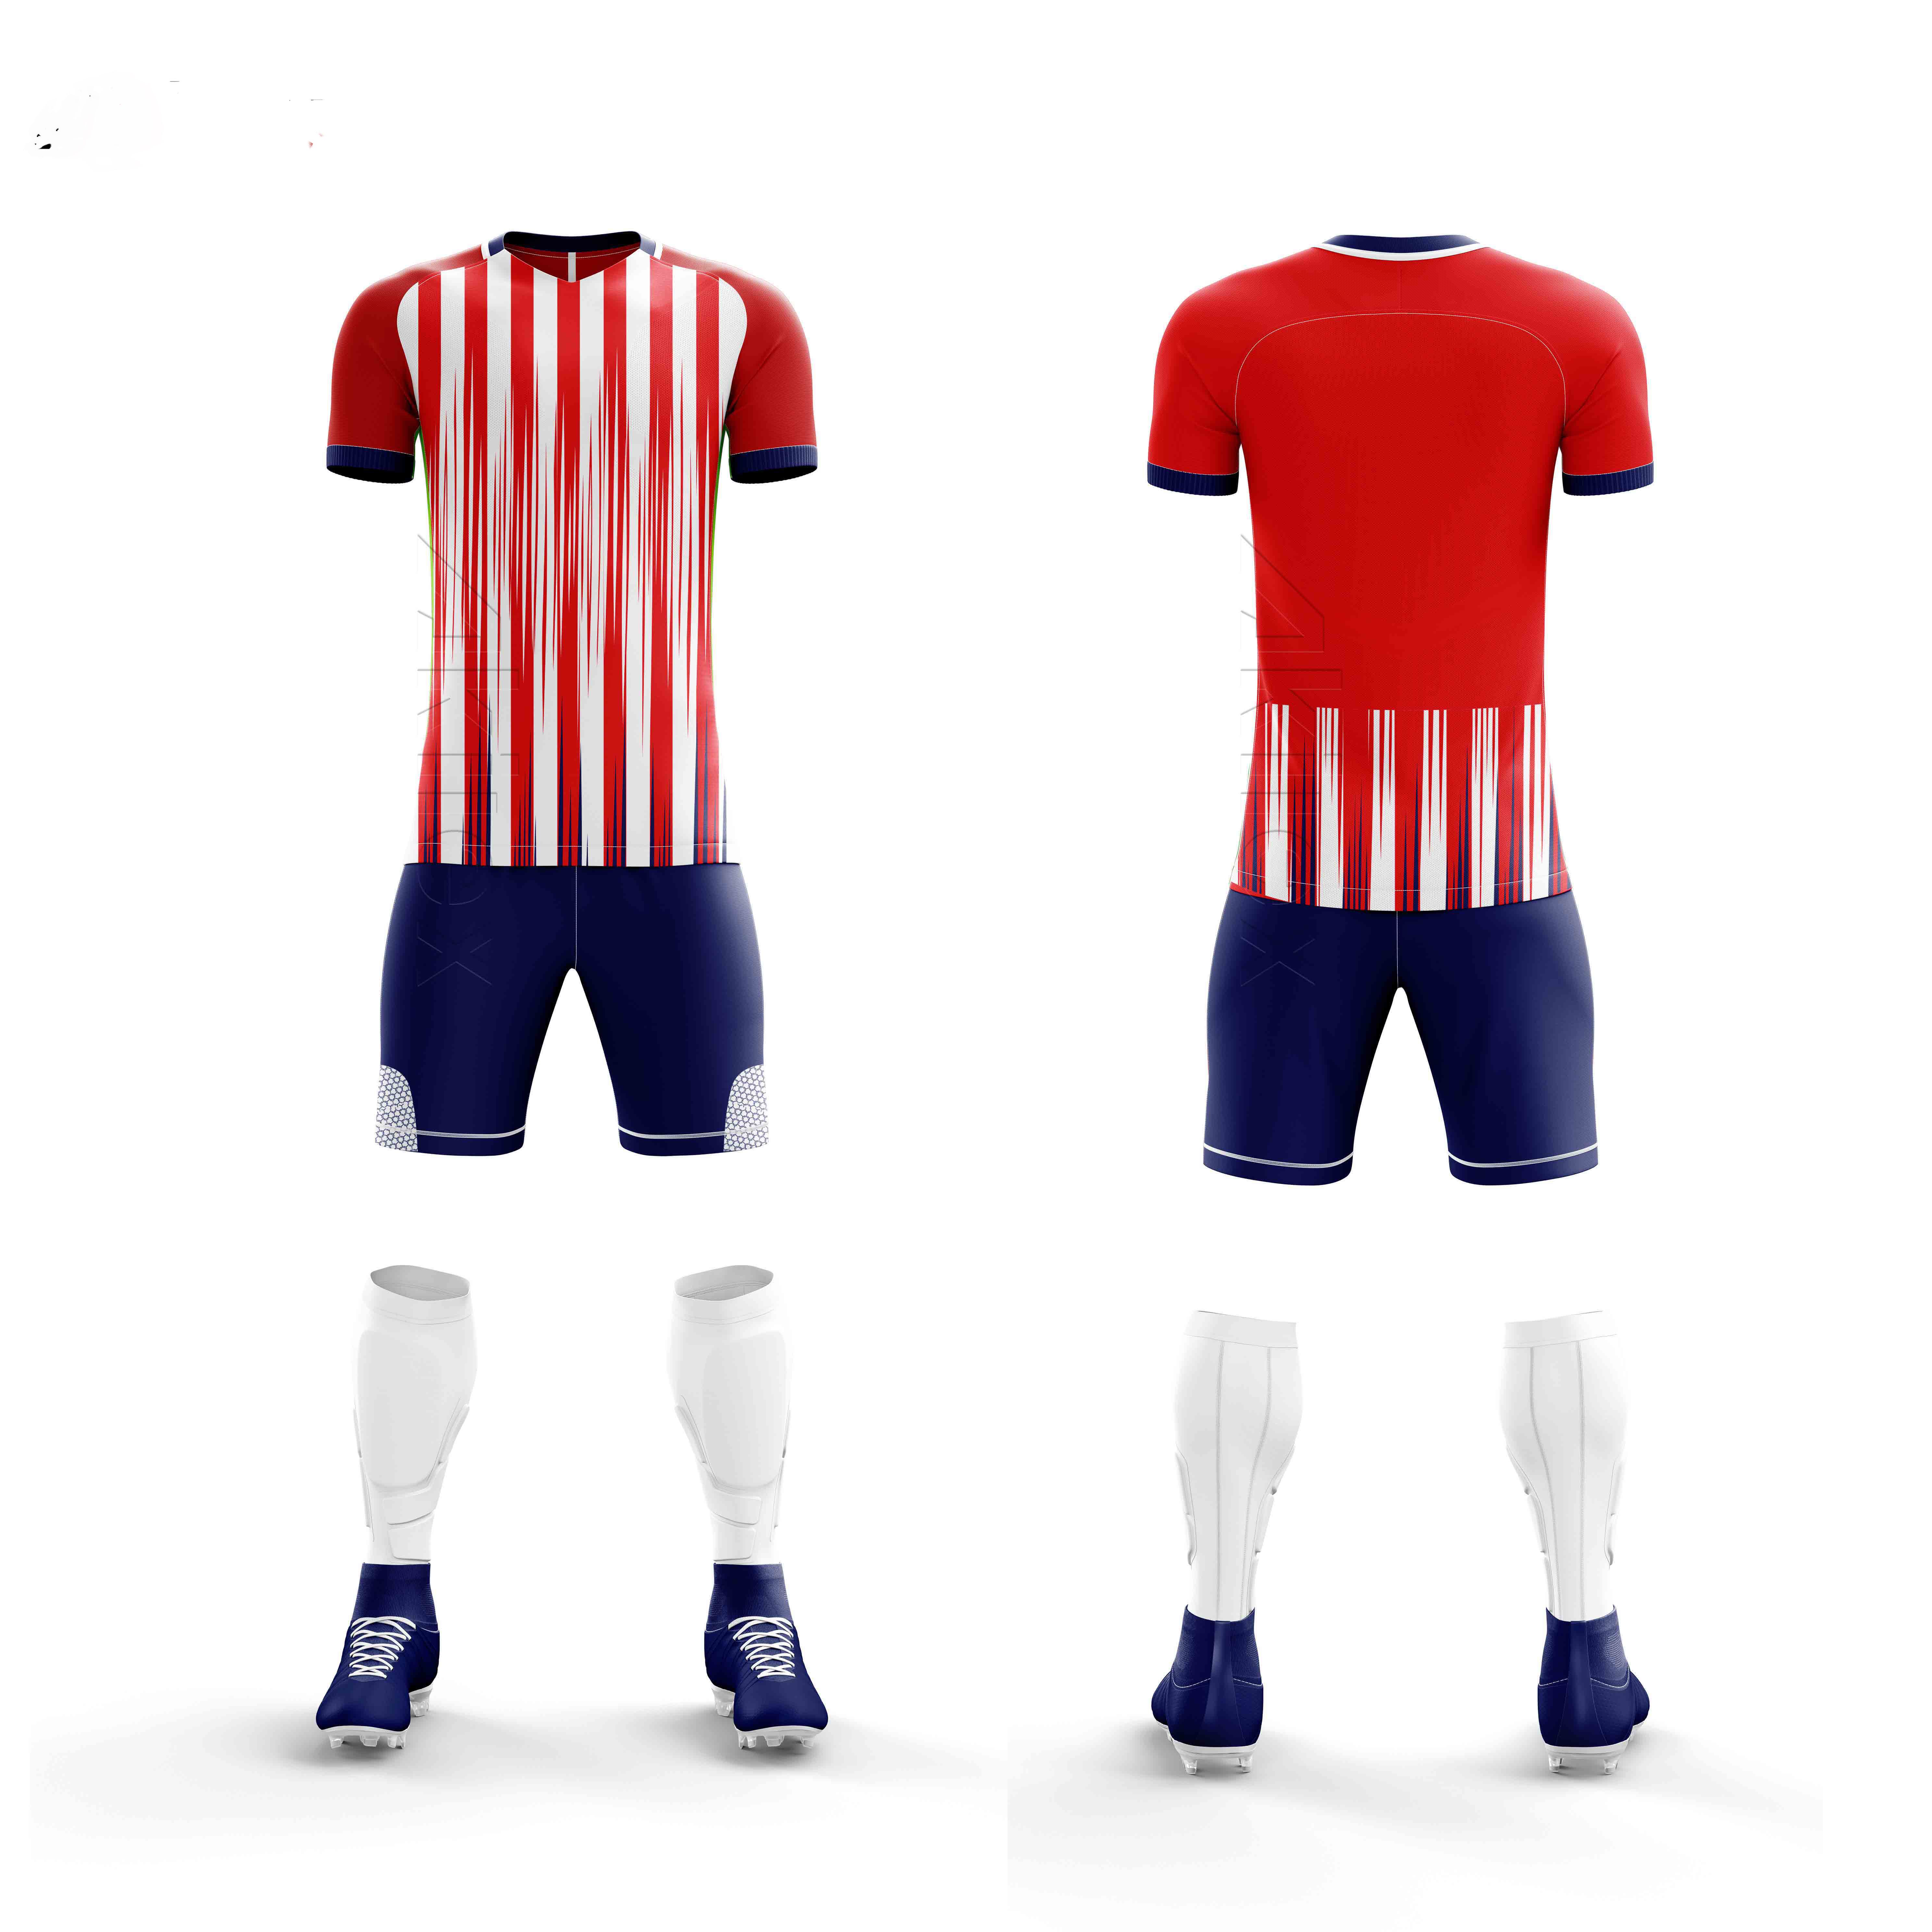 football jersey and shorts designs